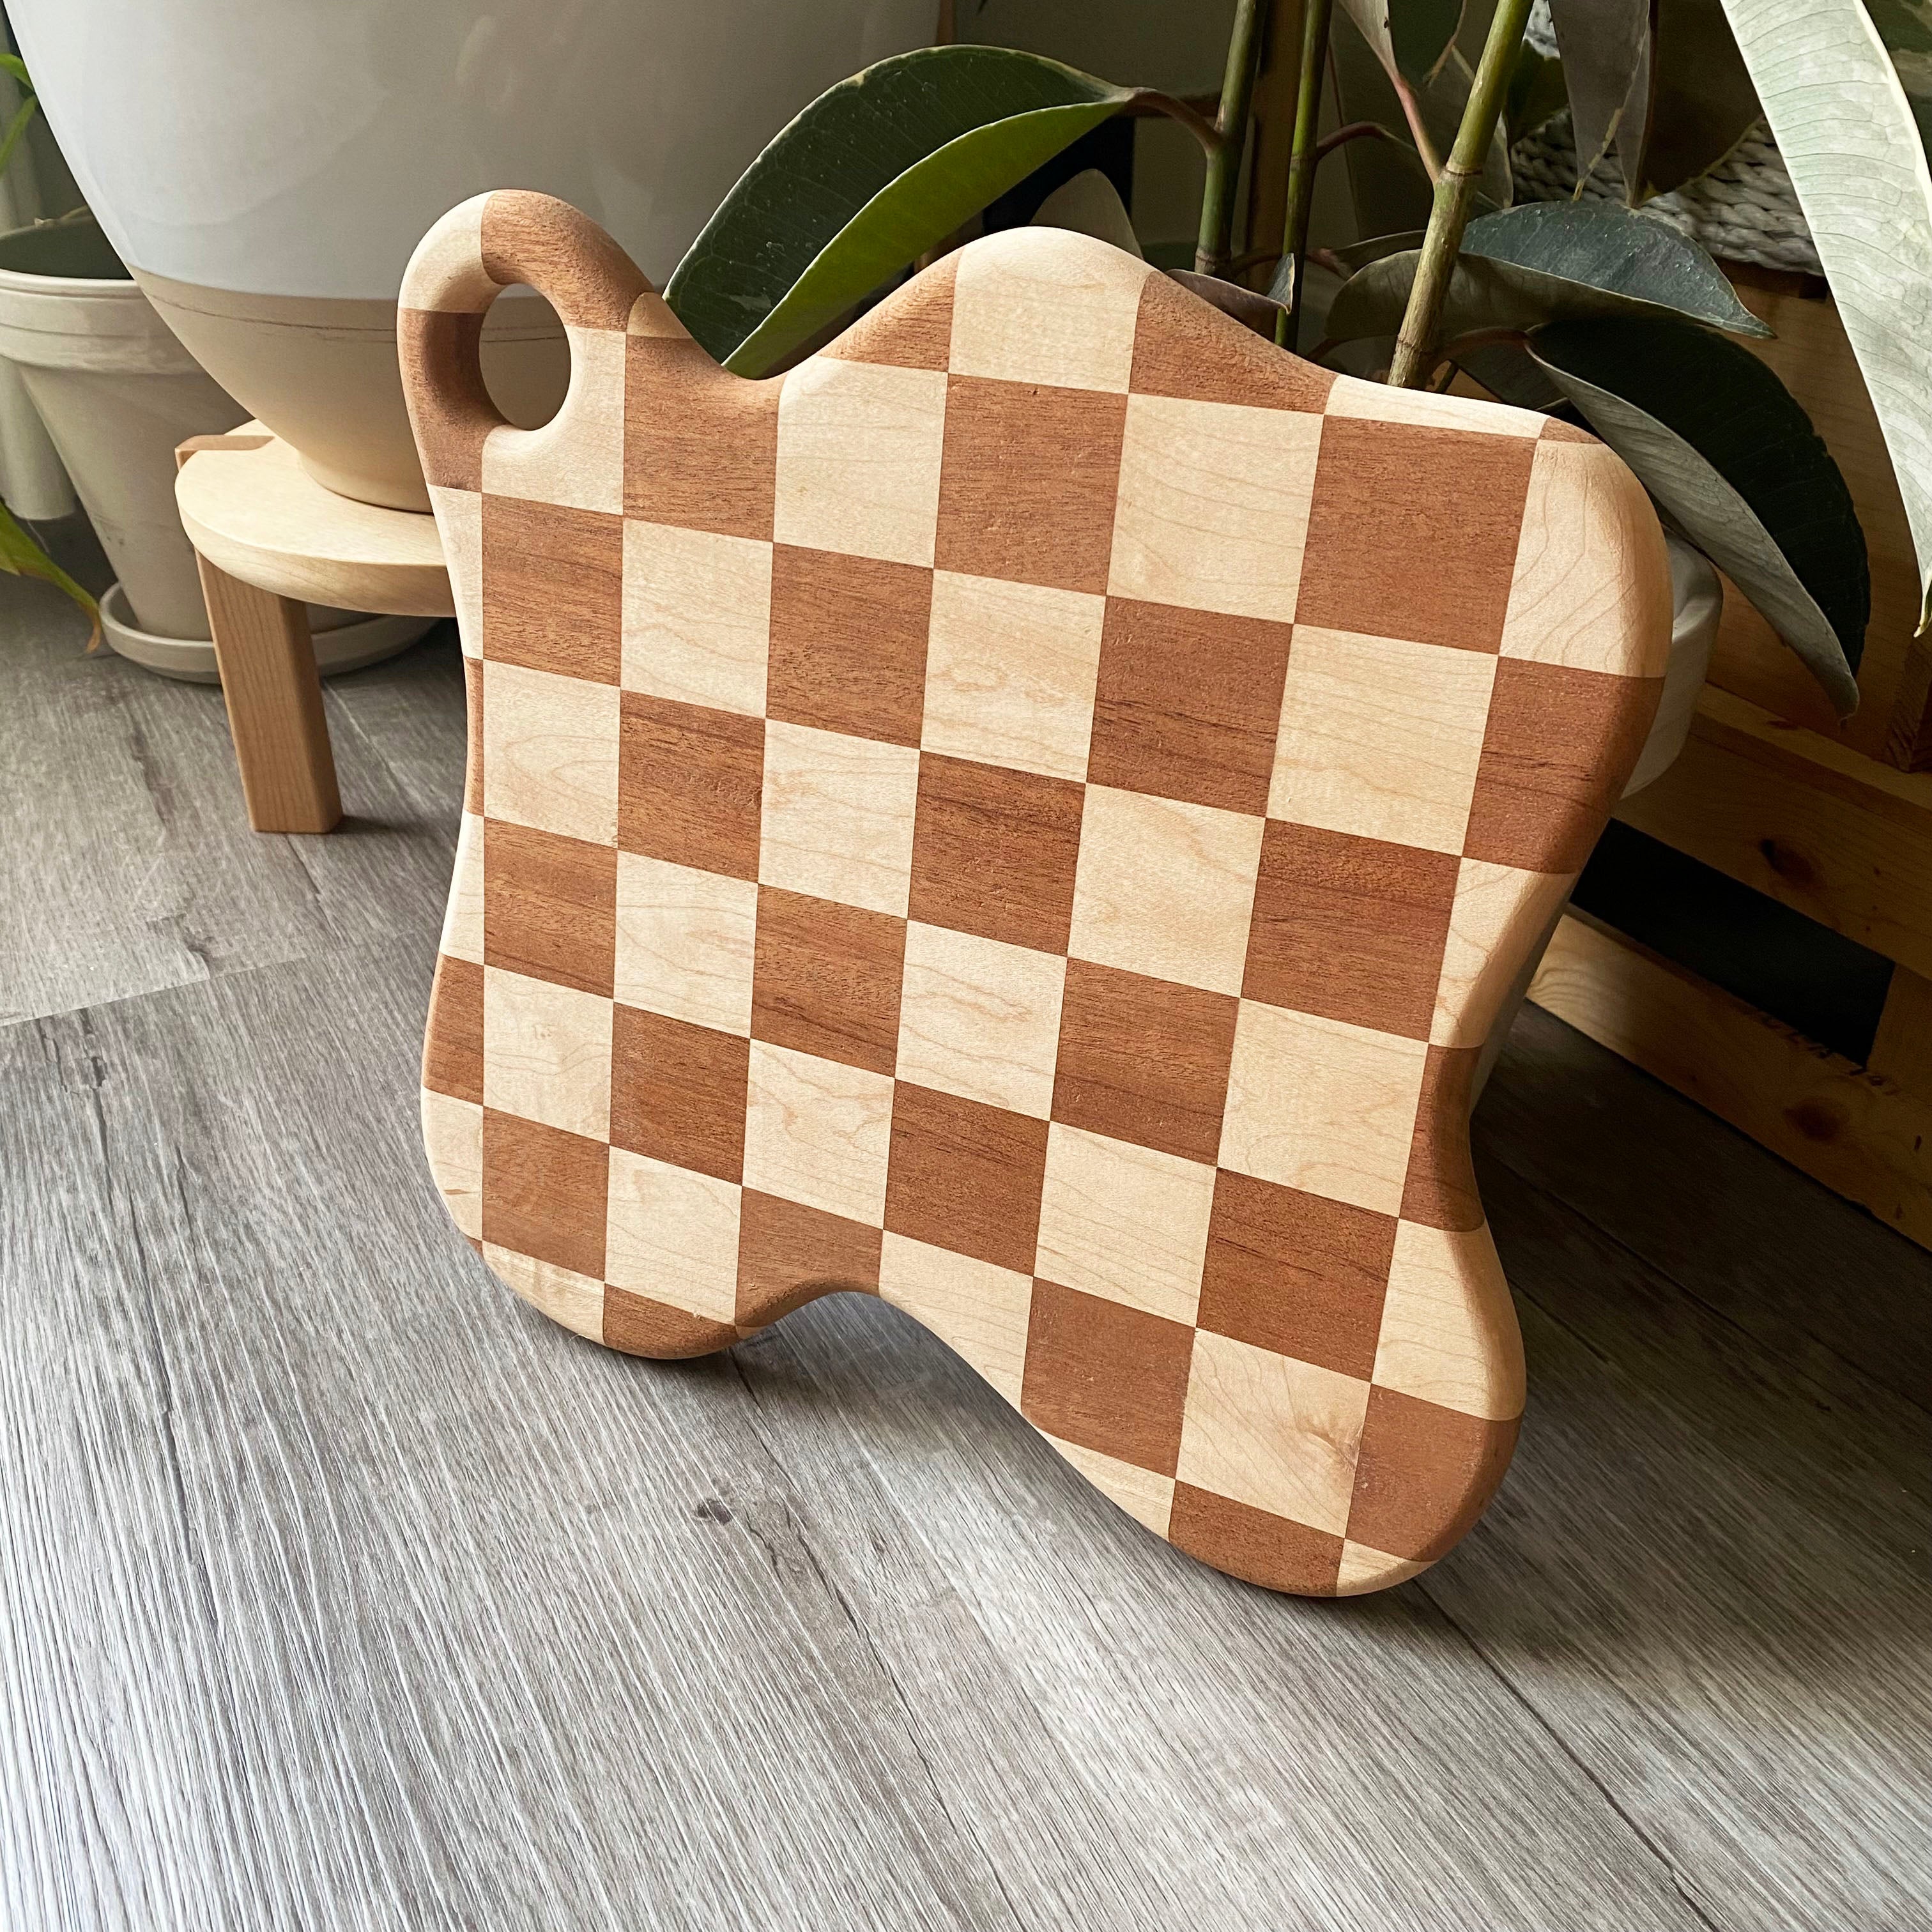 Chic Checkered Serving Board | Cutting Board